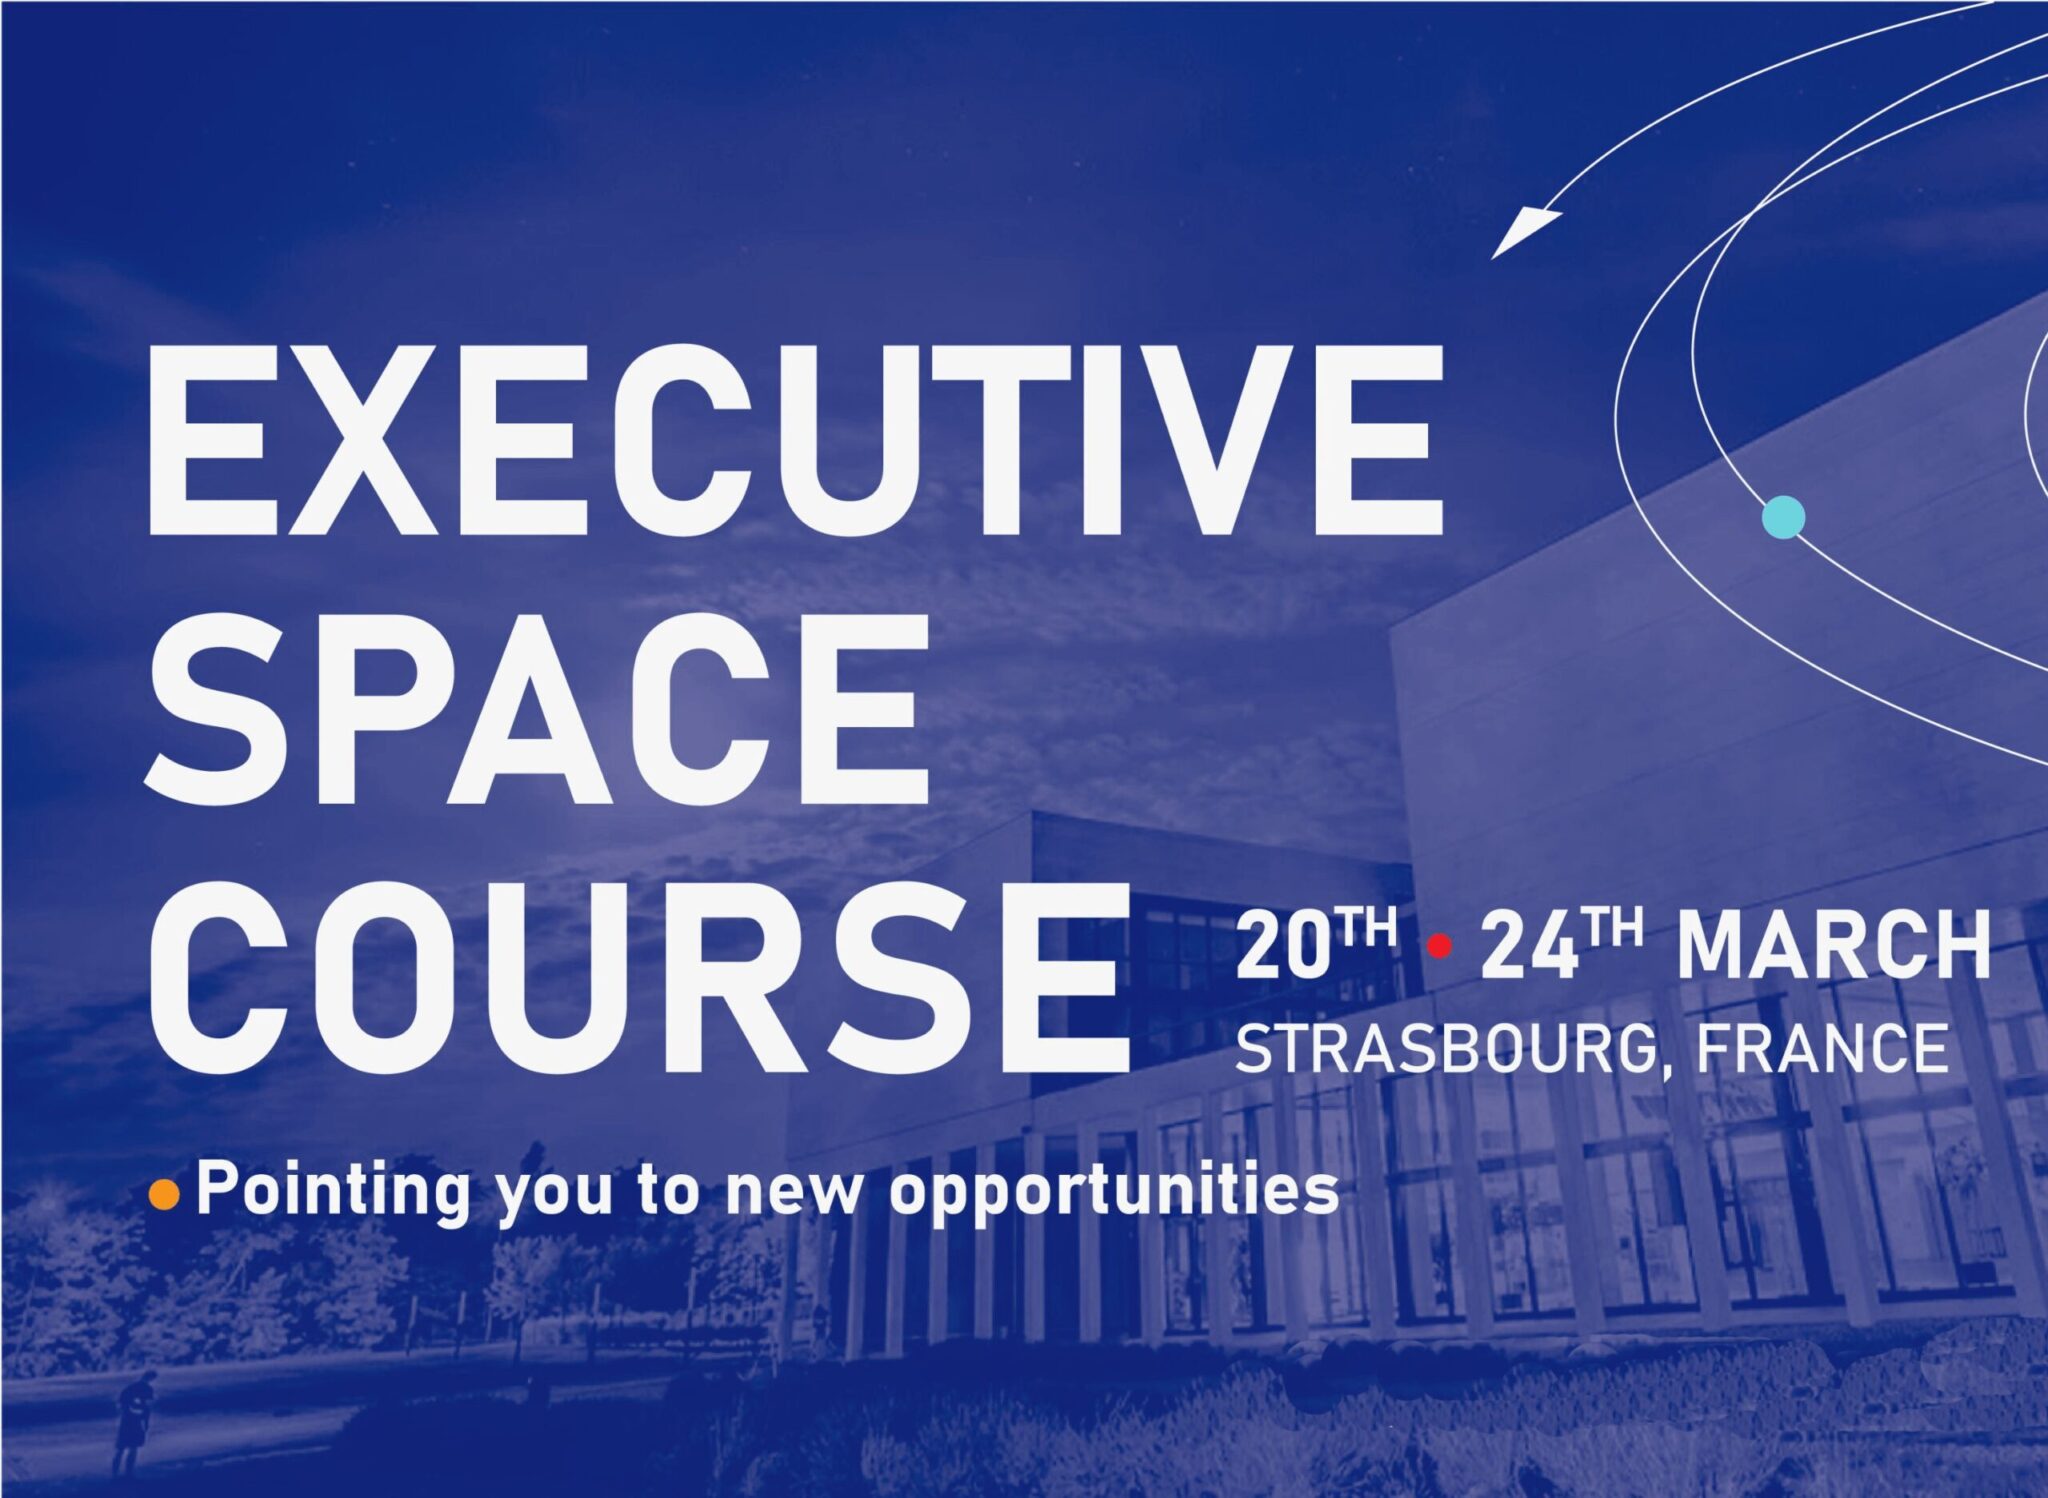 Resolution of the ‘NewSpace Catalonia’ scholarships for the ISU Executive Space Course